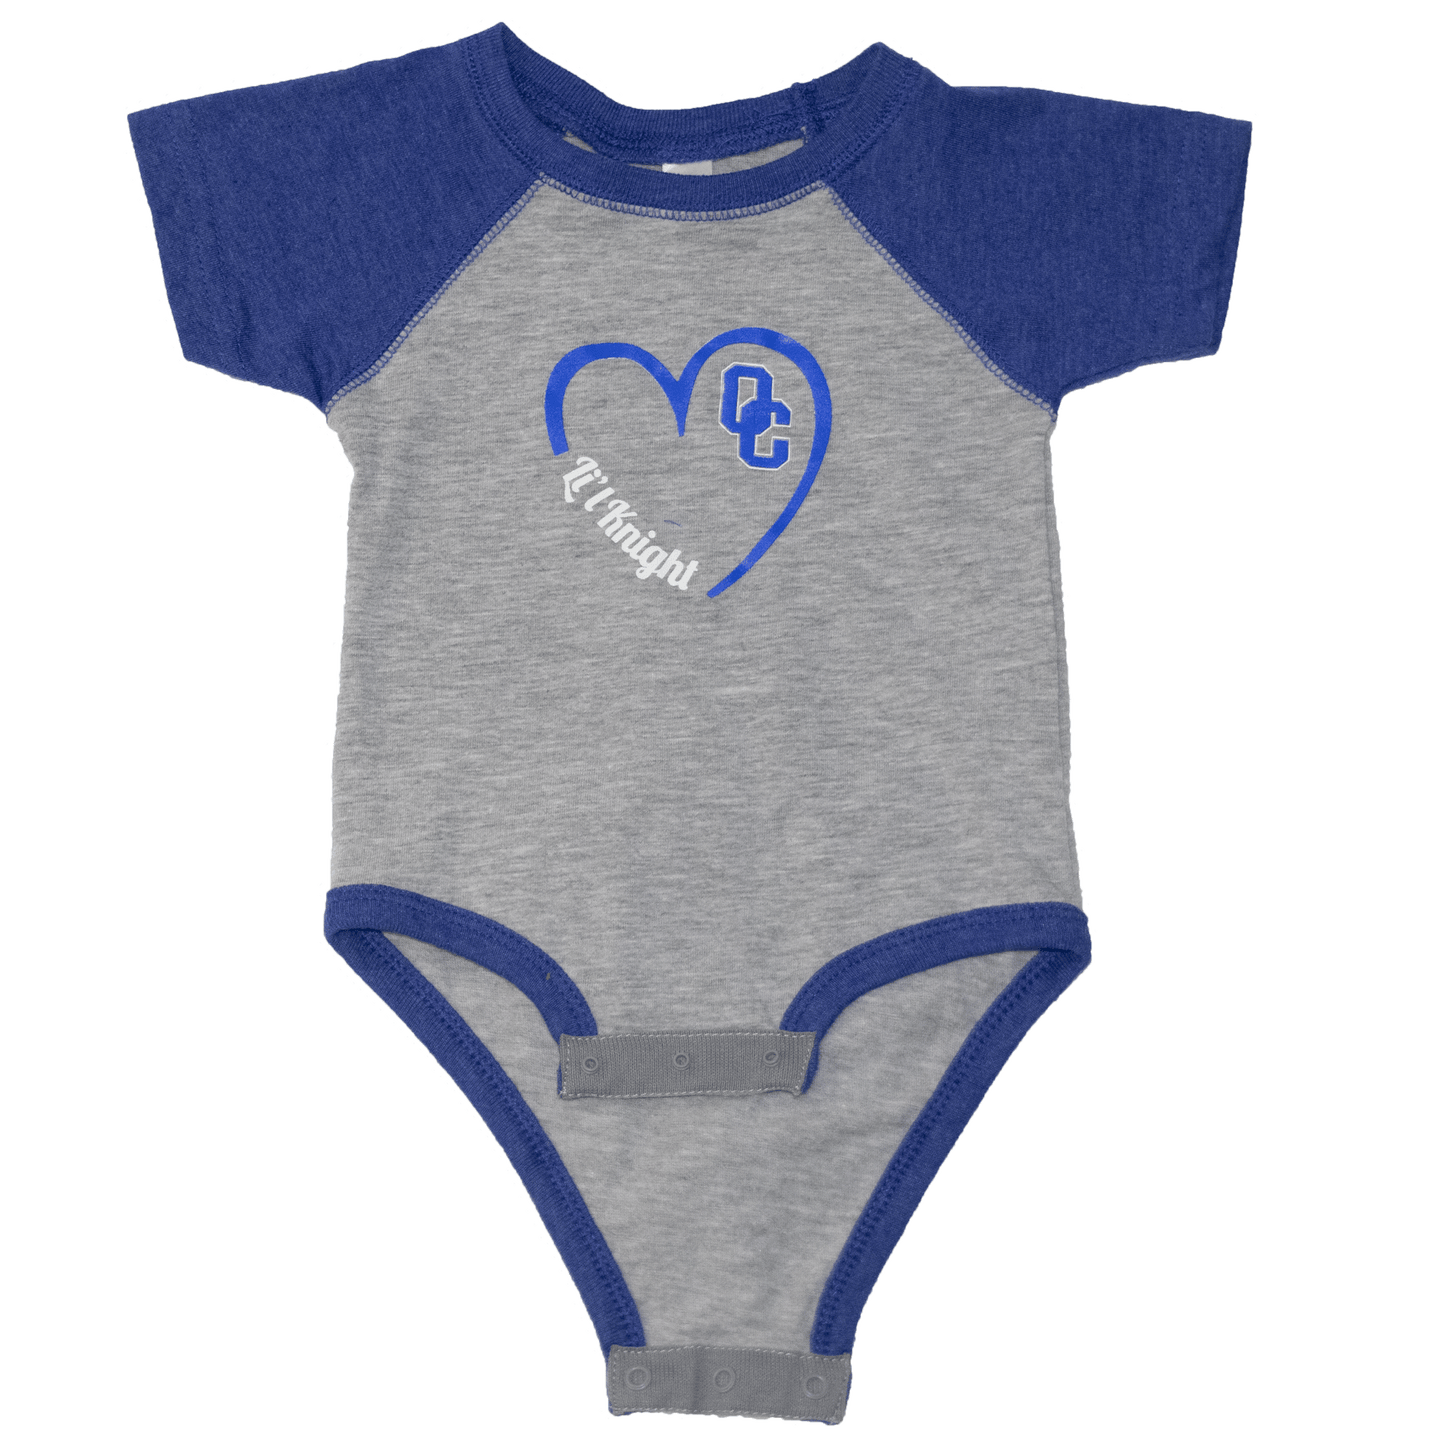 Gray baby onesie with blue sleeves and a li'l knight logo on the chest in blue